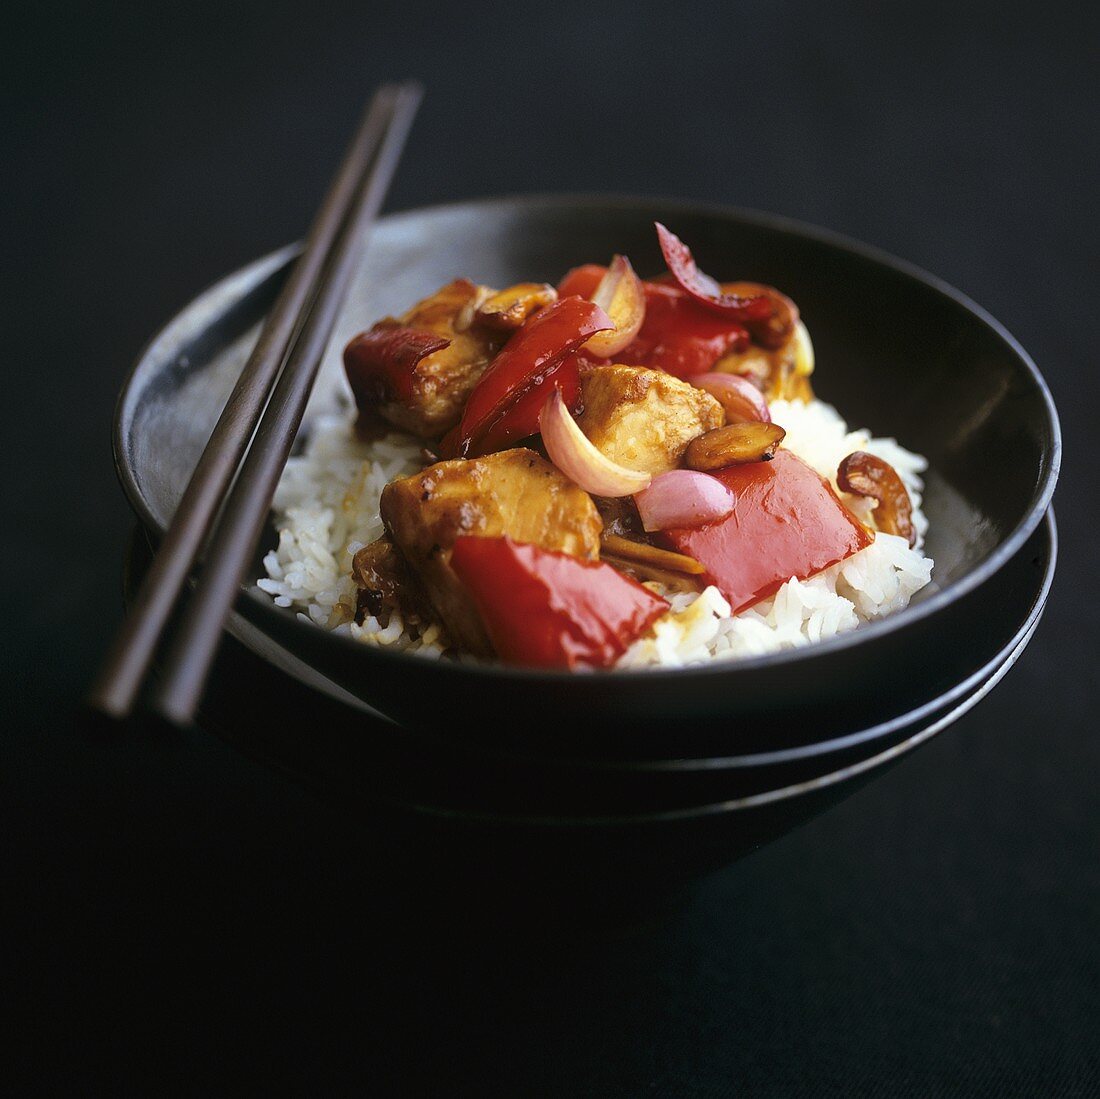 Chicken with red peppers on rice